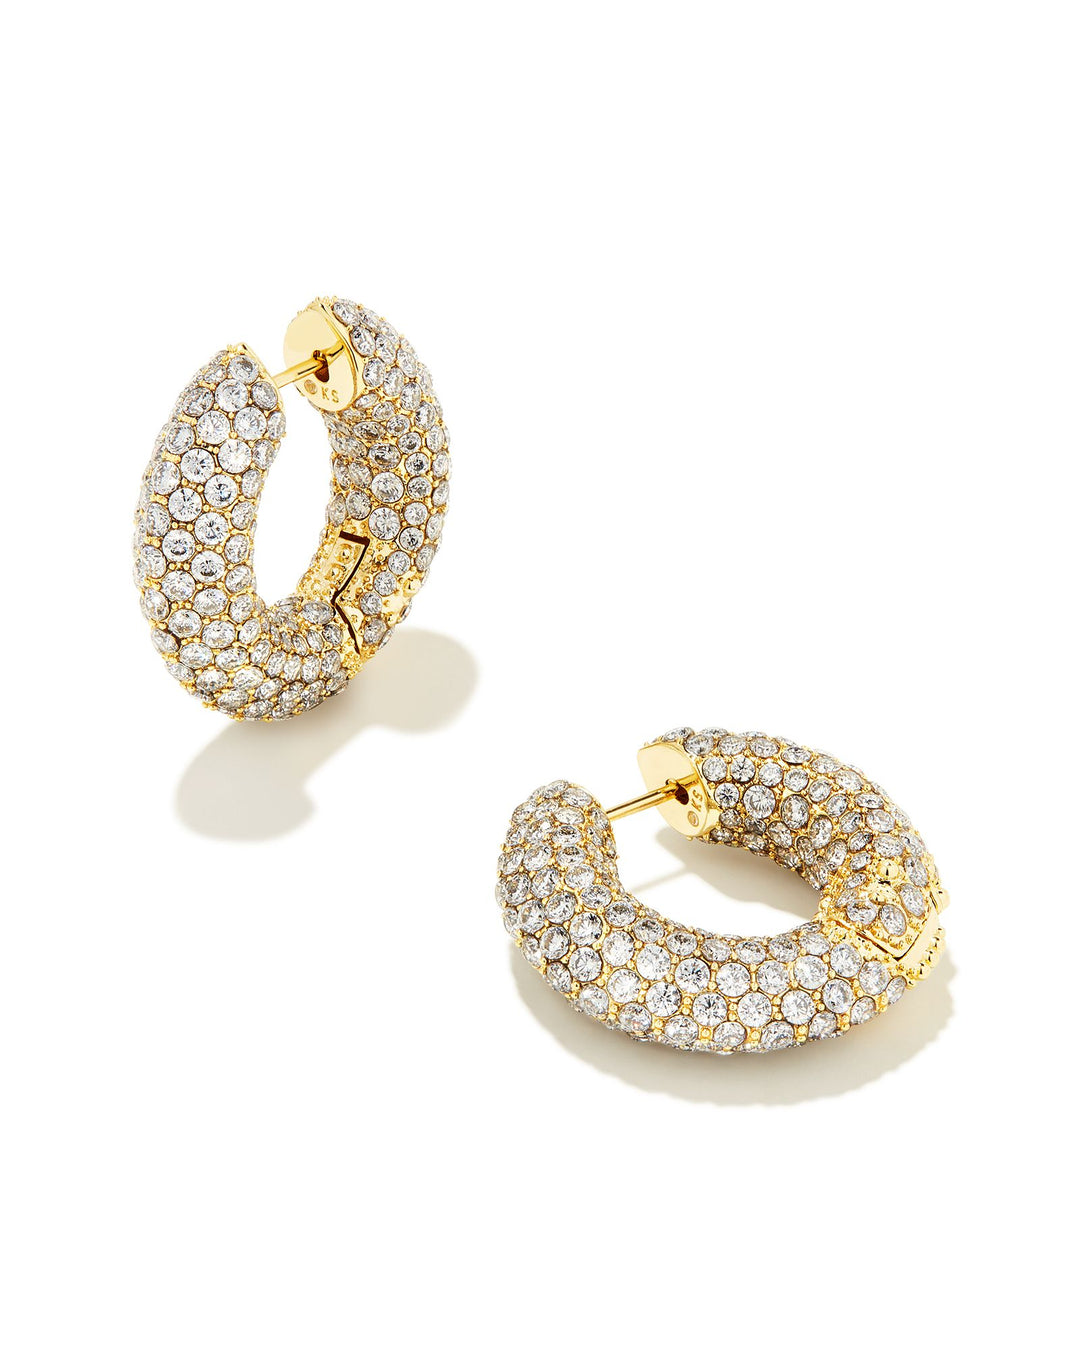 MIKKI PAVE HOOP EARRINGS - GOLD WHITE CZ